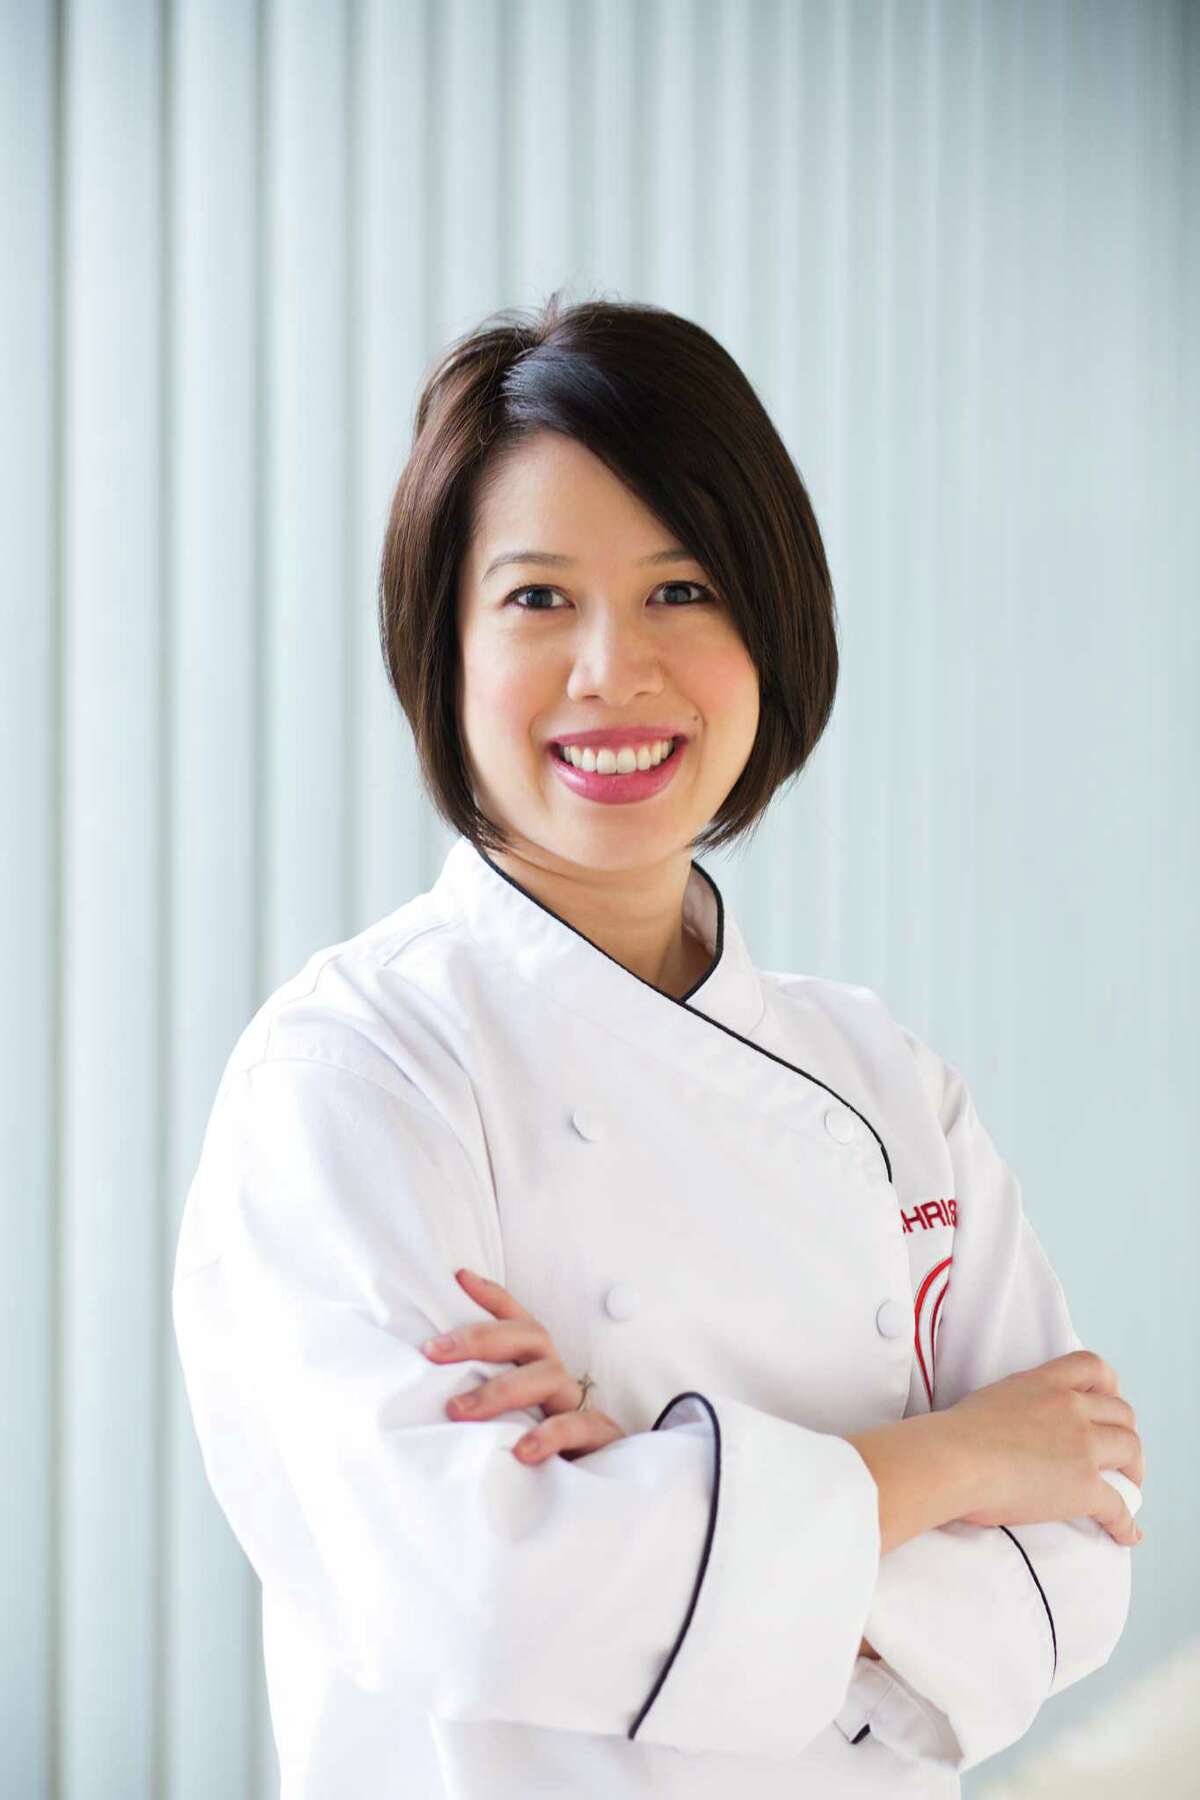 Houstonian Christine Ha, Season 3 winner of "MasterChef," is the author of "Recipes From My Home Kitchen."